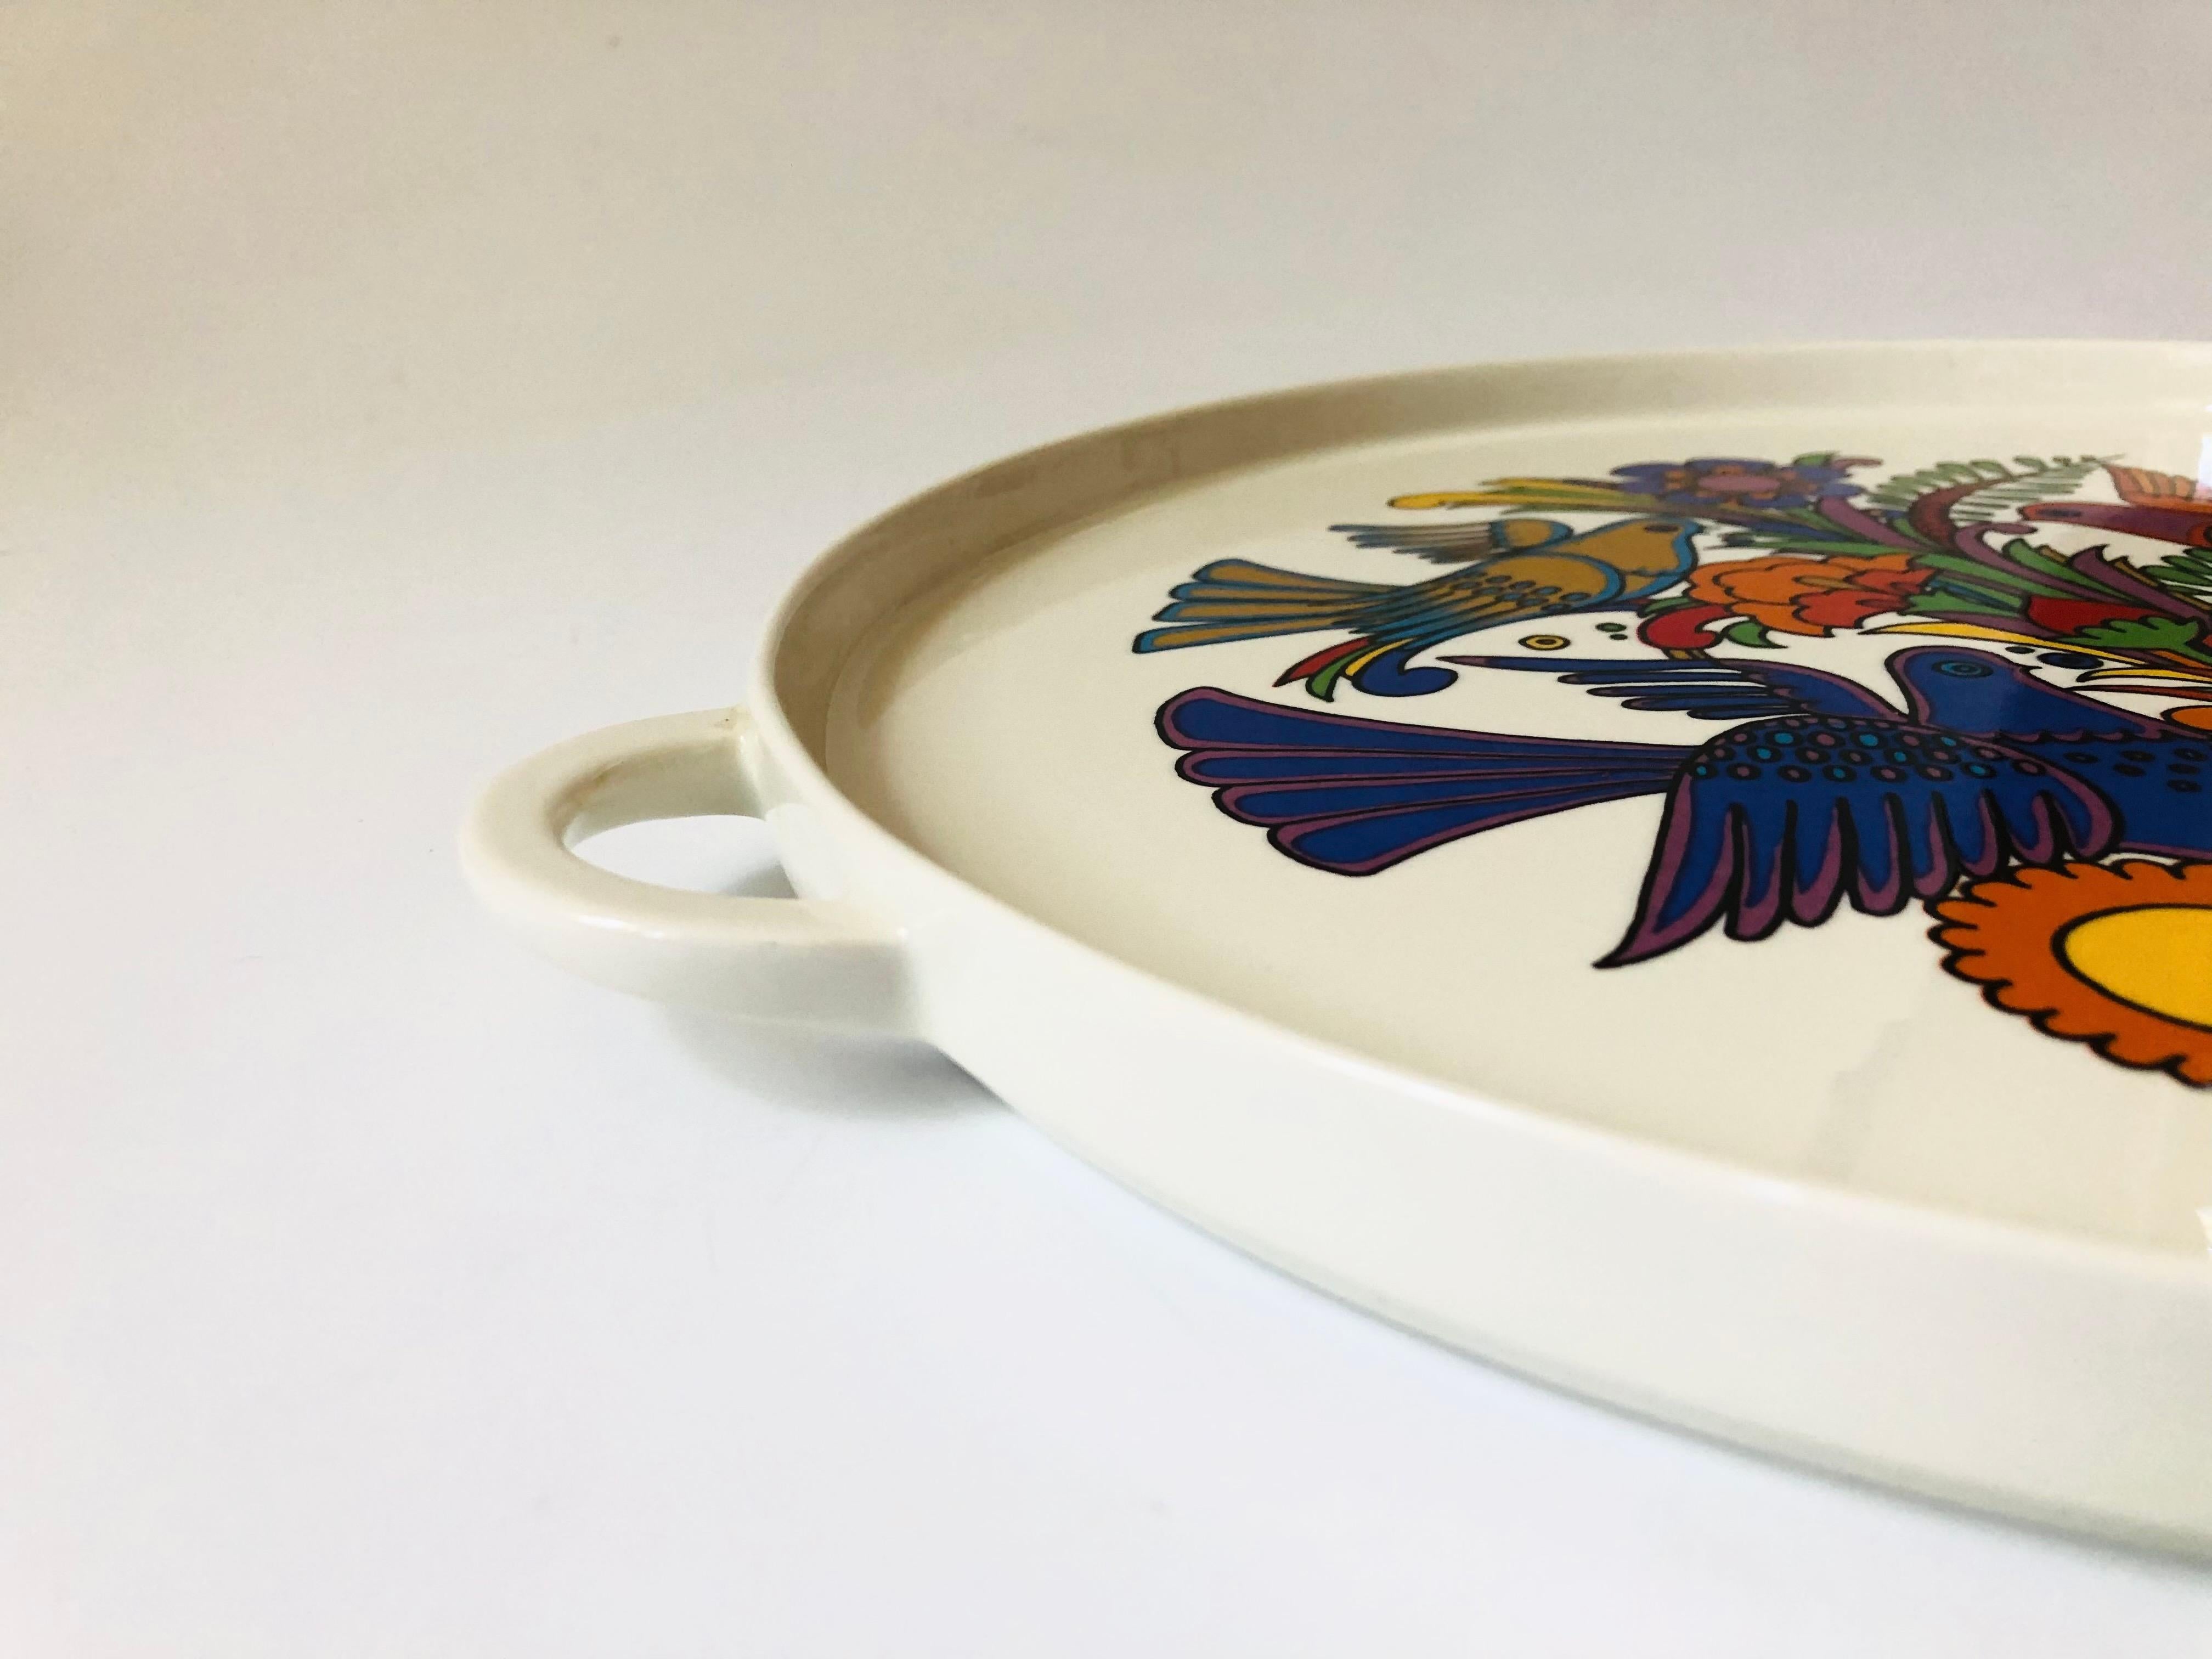 Luxembourgish Large 1960s Villeroy and Boch Acapulco Serving Tray